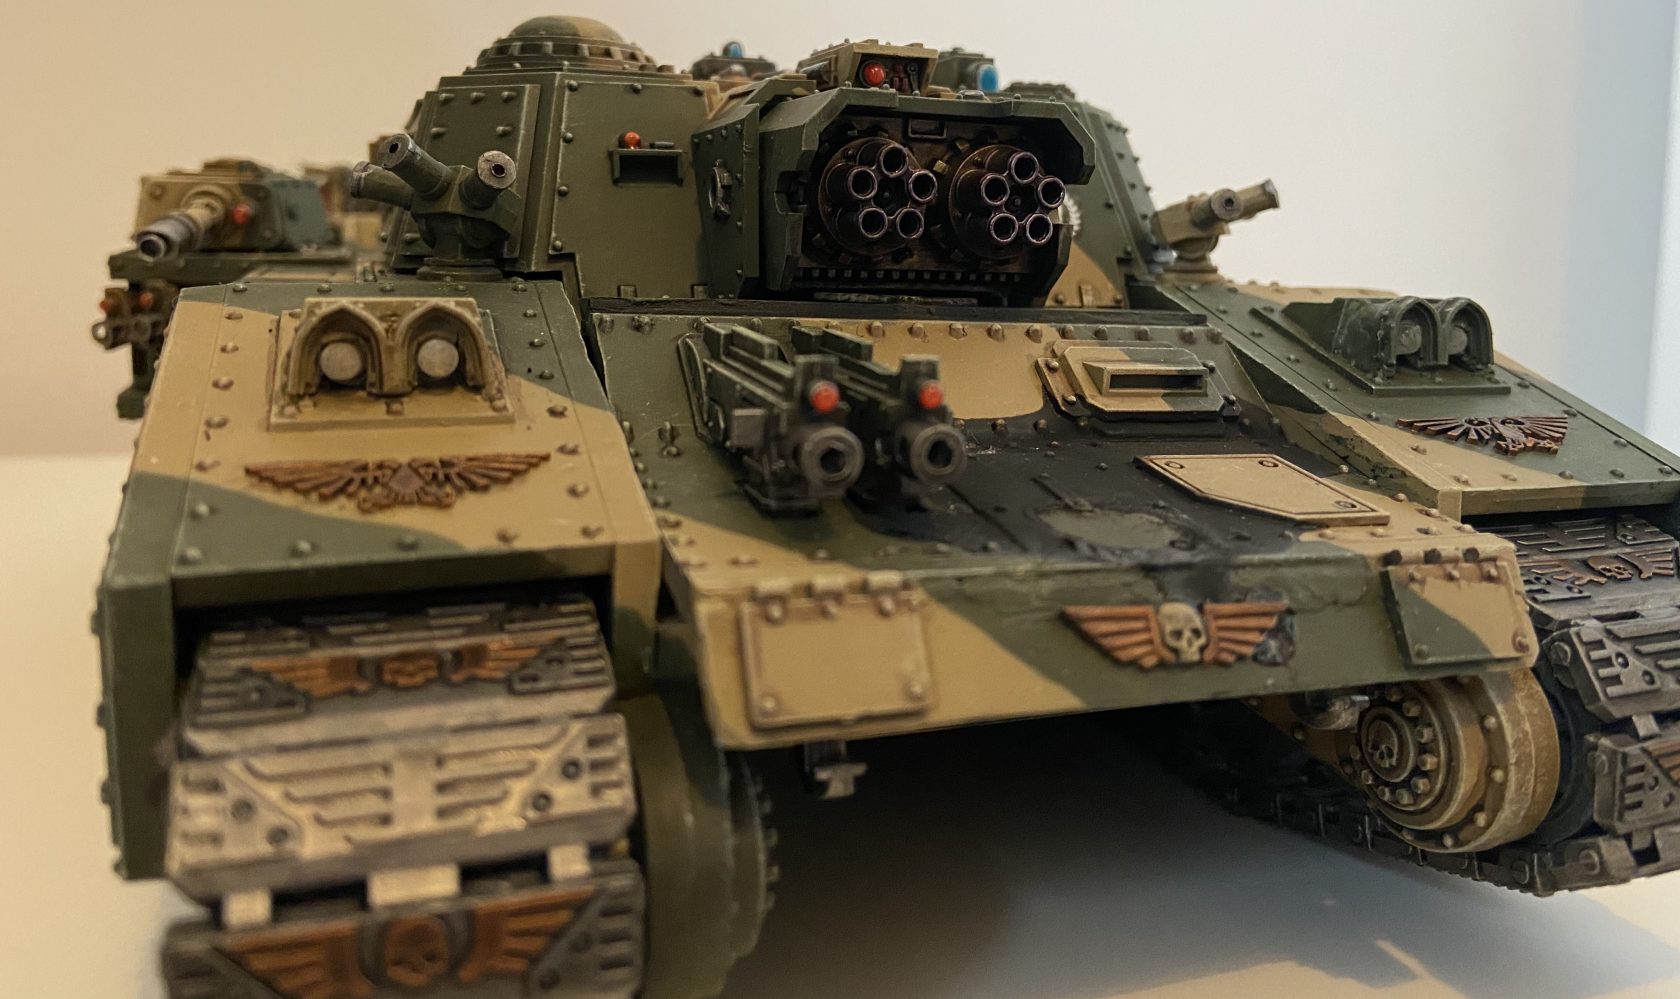 Astra Militarum Tank Ace List - The Greater Good